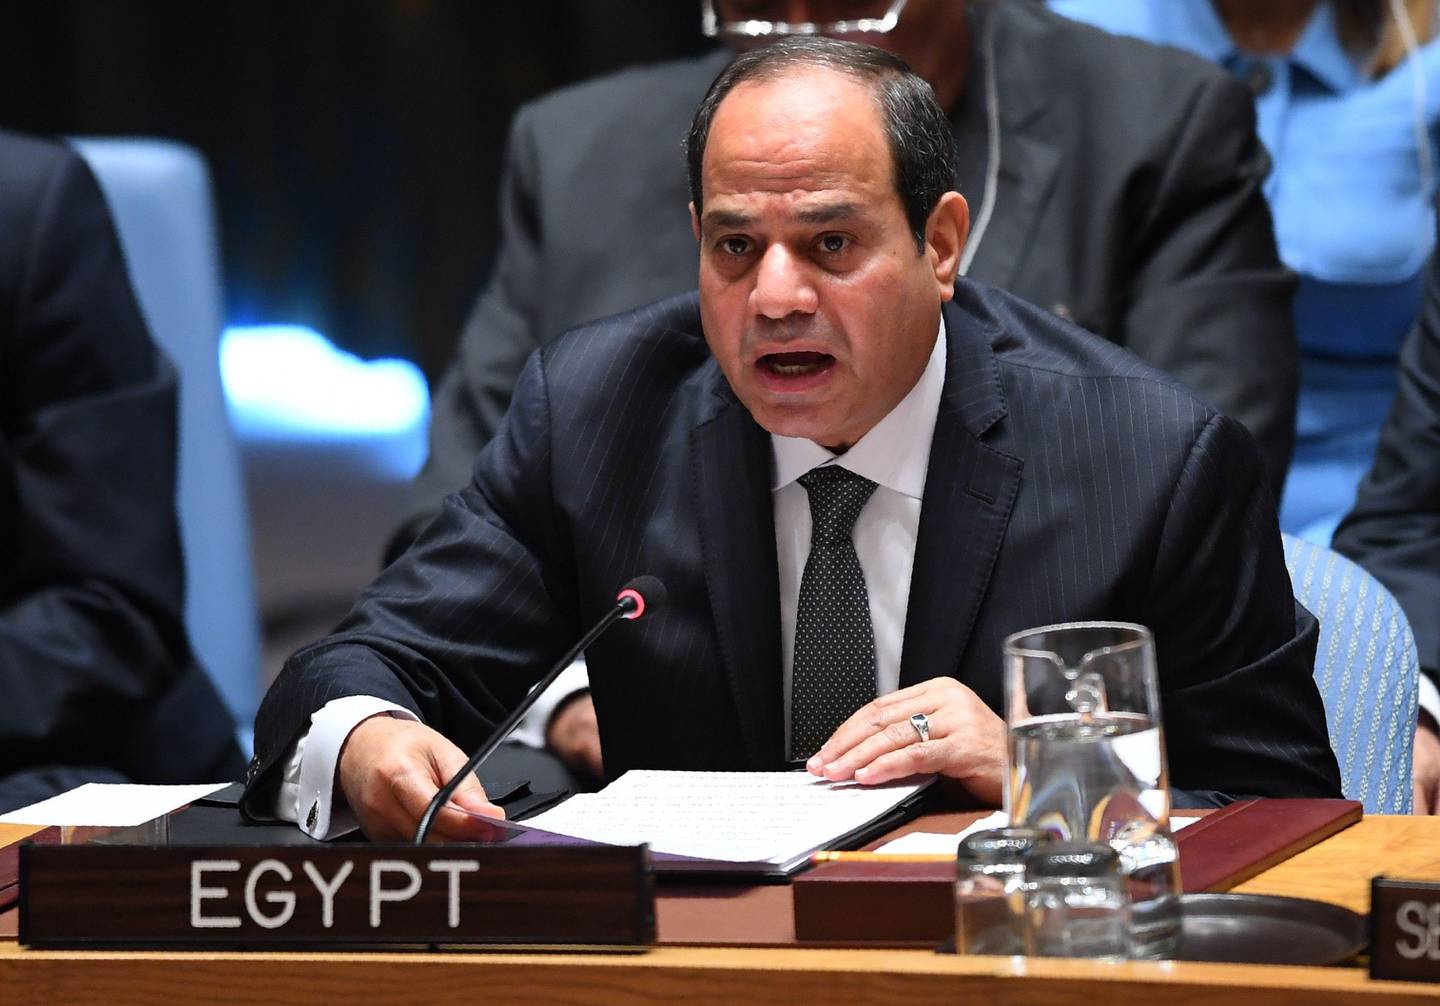 Egyptian President Abdel Fattah el-Sisi speaks at a meeting of the UN Security Council on peacekeeping operations, during the 72nd session of the General Assembly in New York on September 20, 2017. / AFP PHOTO / TIMOTHY A. CLARY